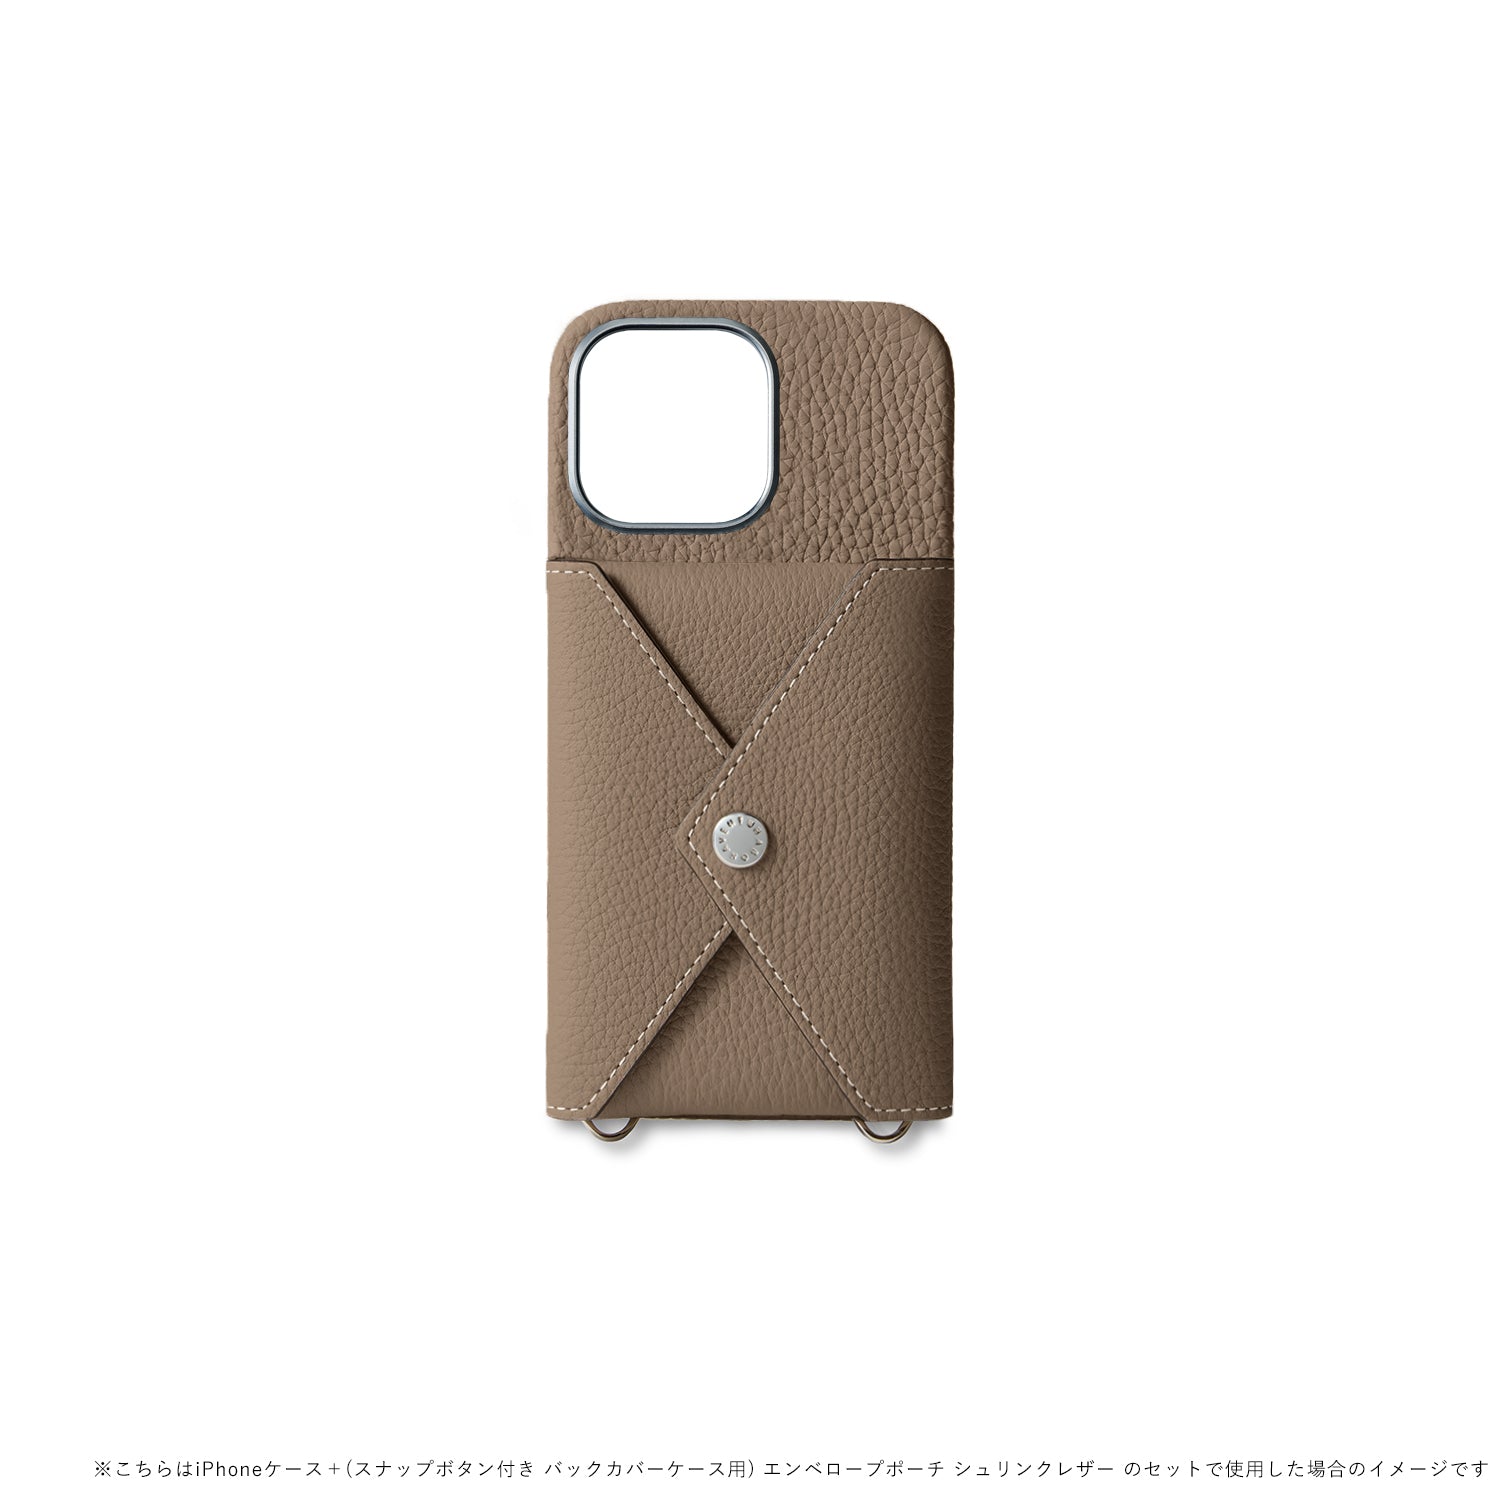 (iPhone 15 Pro Max) Snap button back cover case in shrink leather